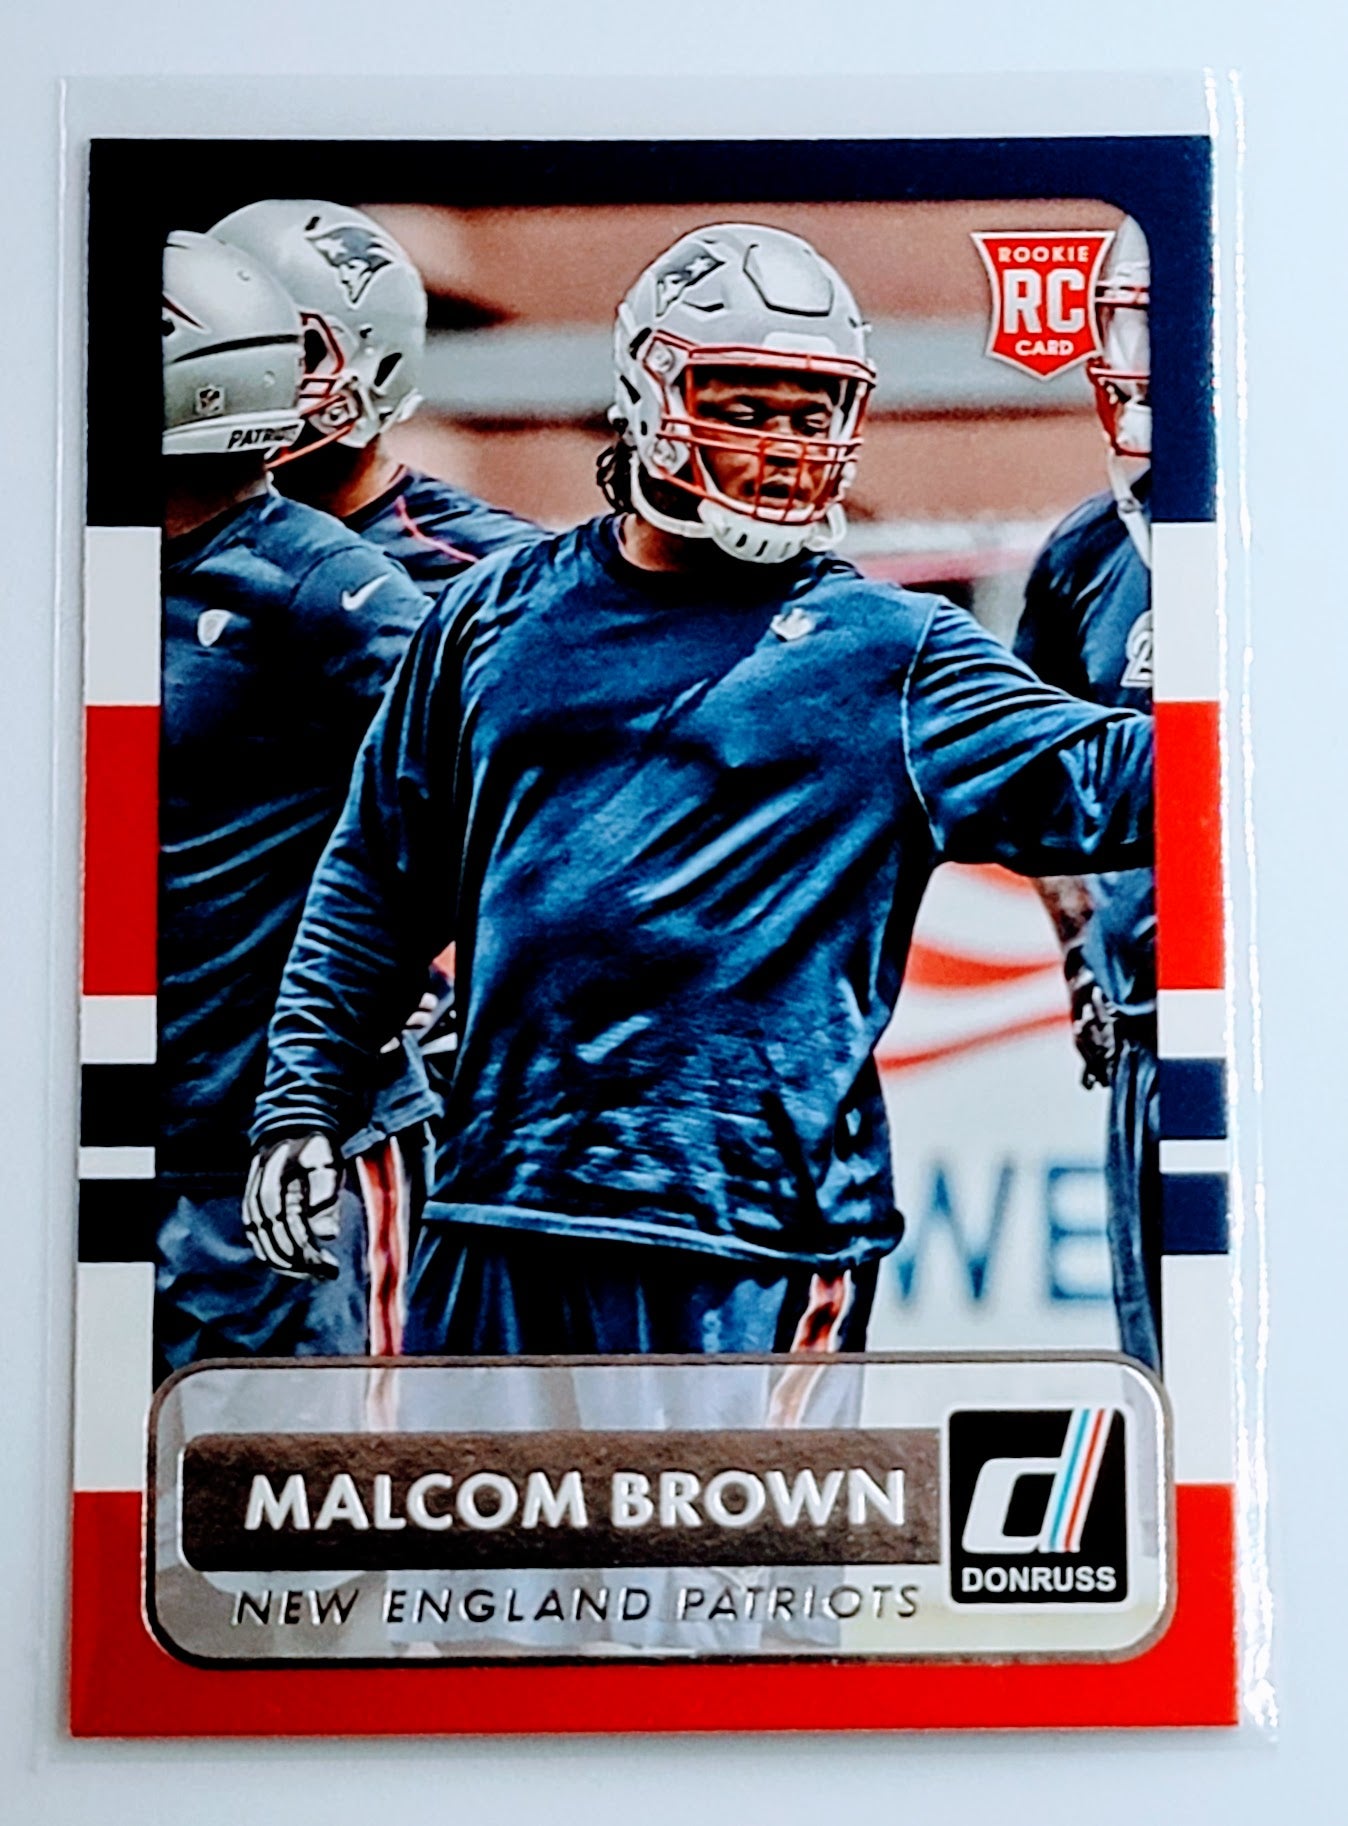 2015 Donruss Malcom Brown Rookie Football Card  TH13C simple Xclusive Collectibles   